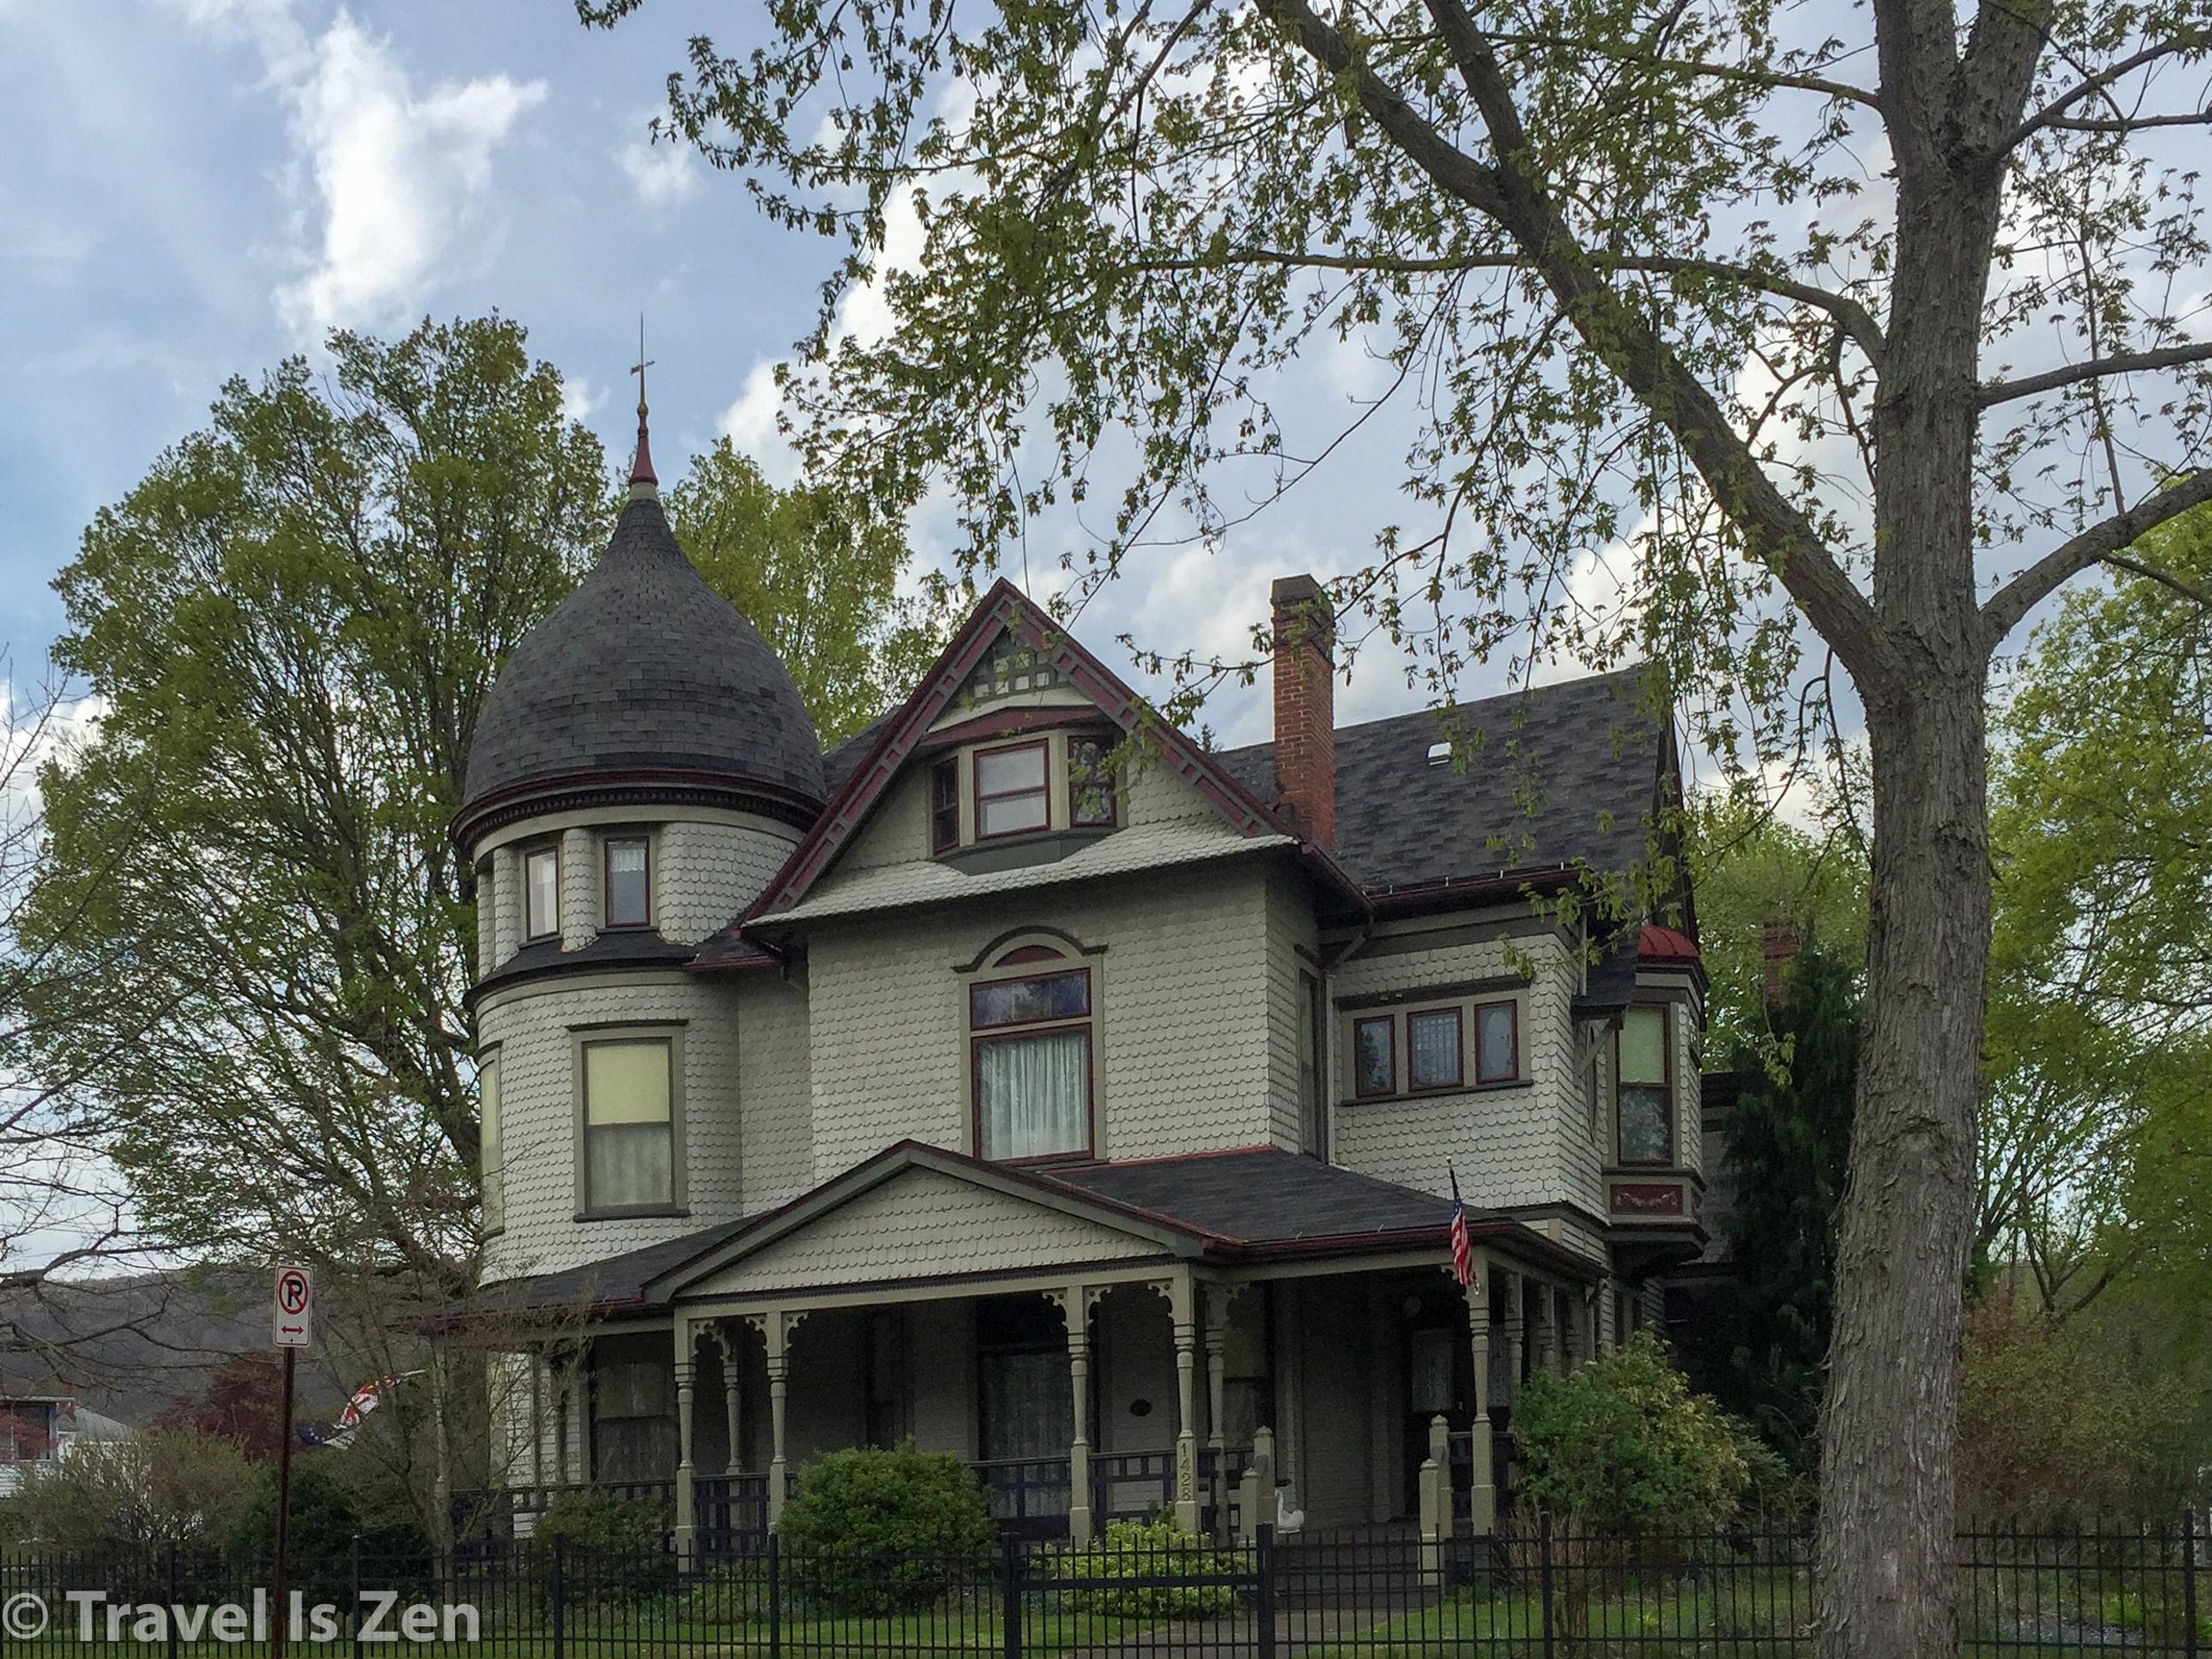 Queen Anne style, 1872